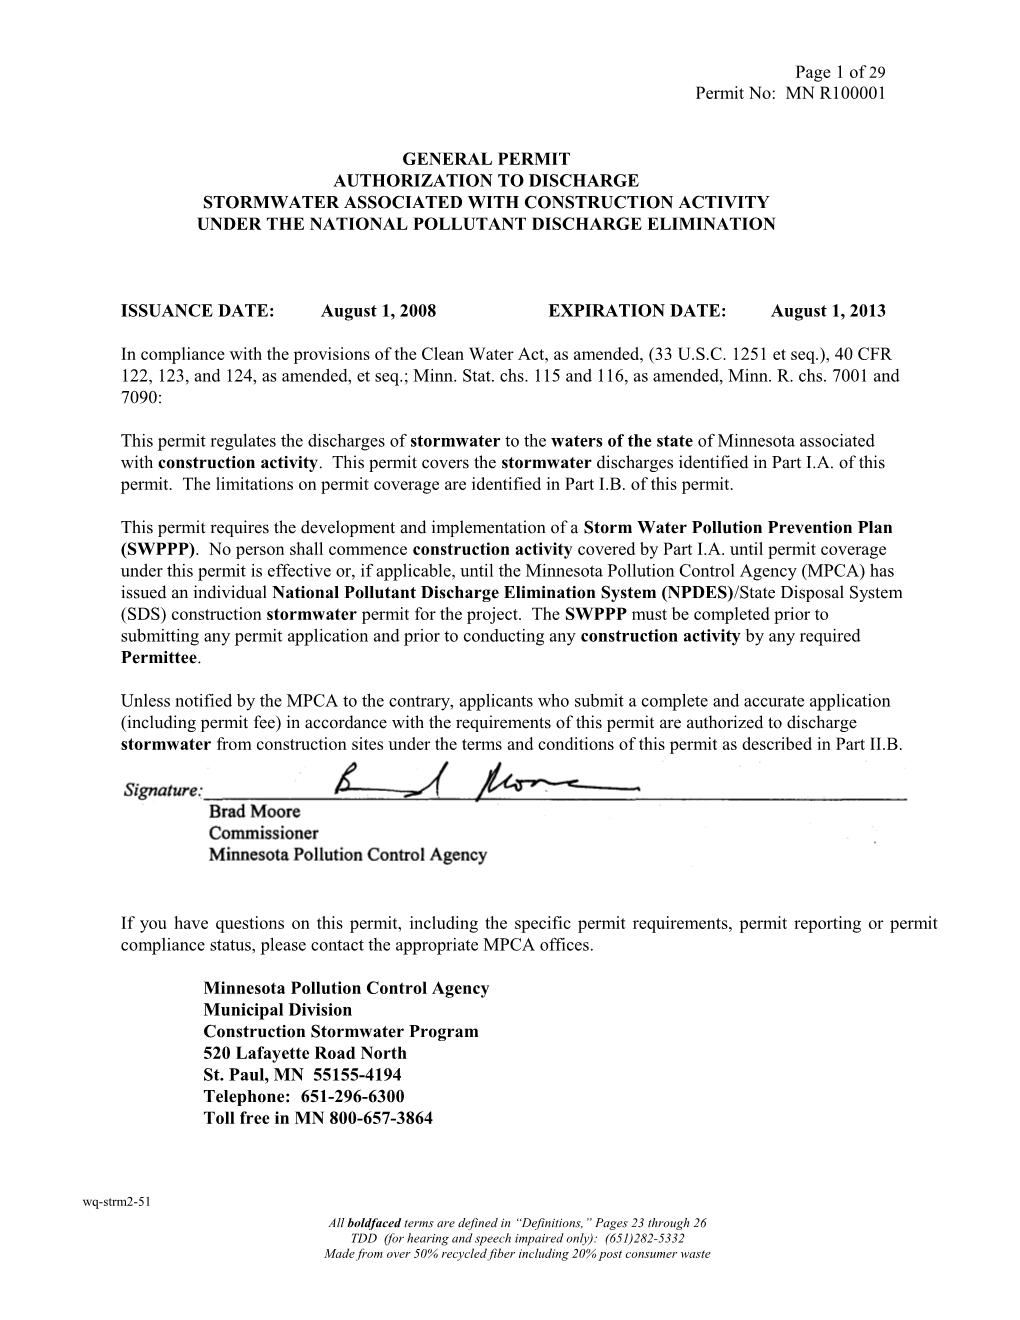 Construction Stormwater General Permit